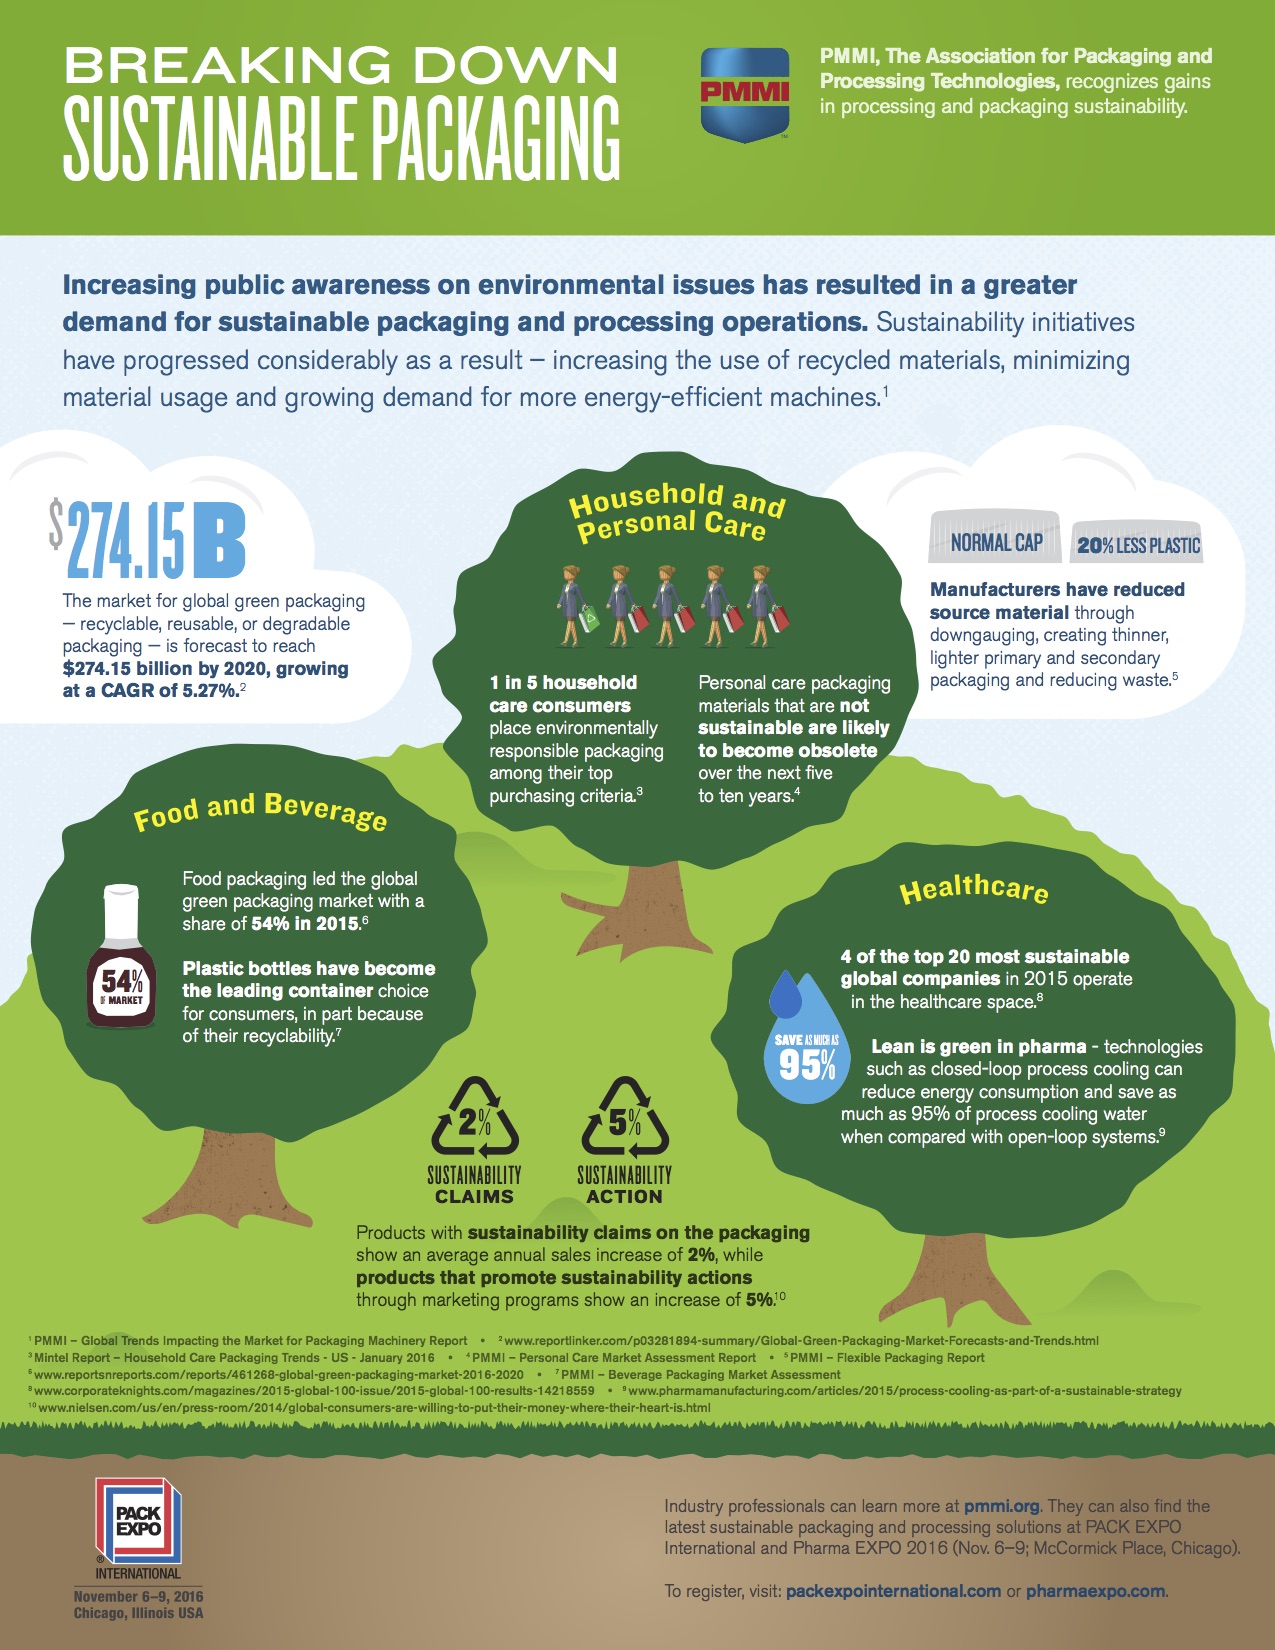 PMMI_packaging_sustainability_infographic.jpg